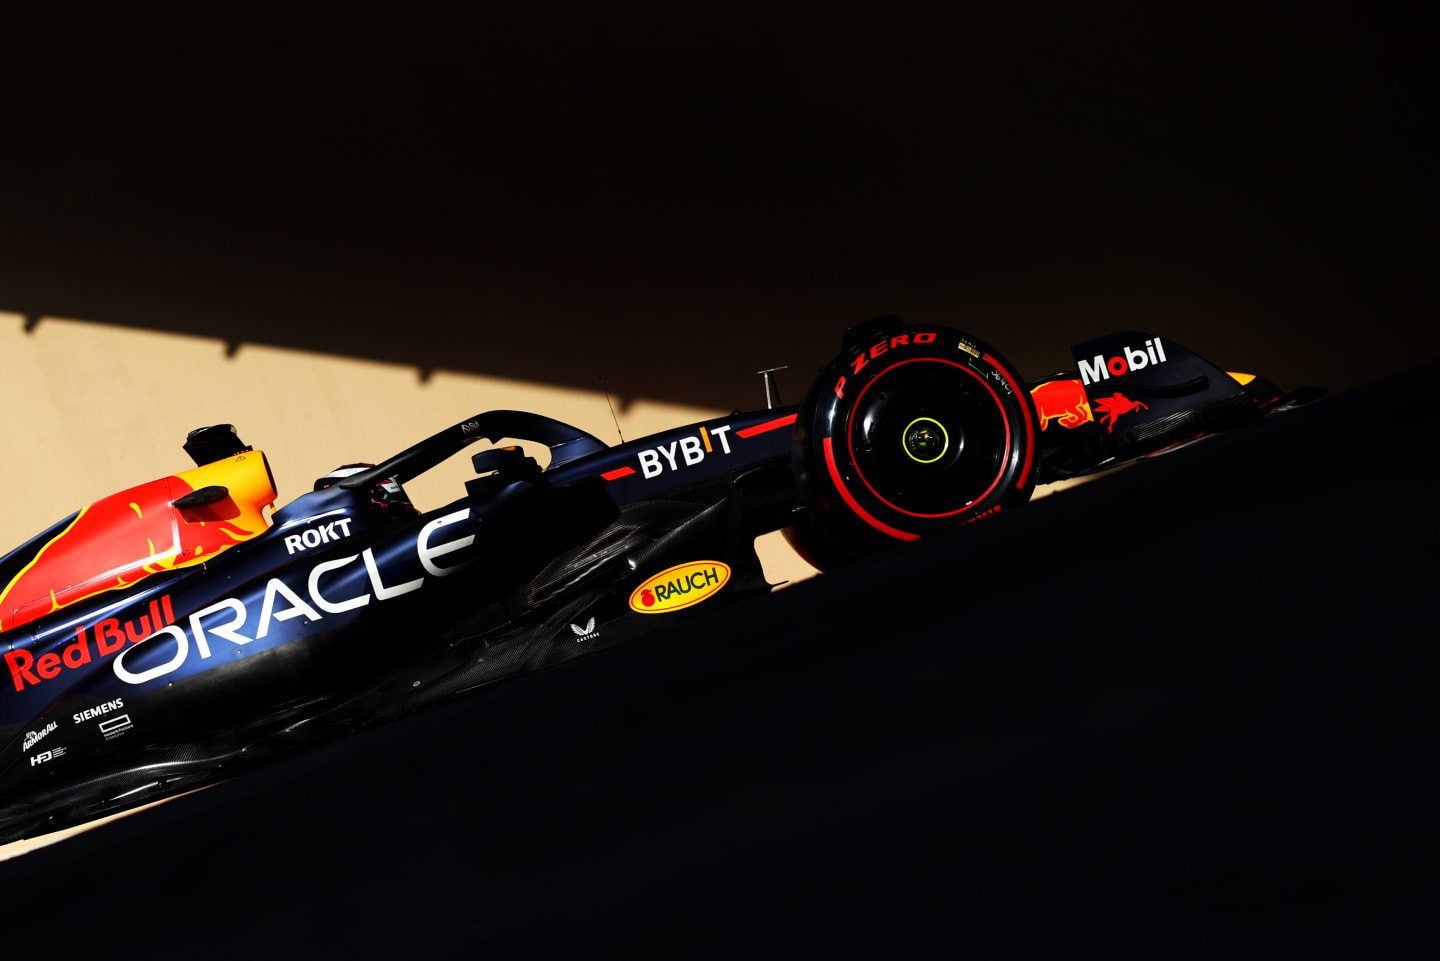 Jake Dennis drives the Red Bull RB19 during the test in Abu Dhabi